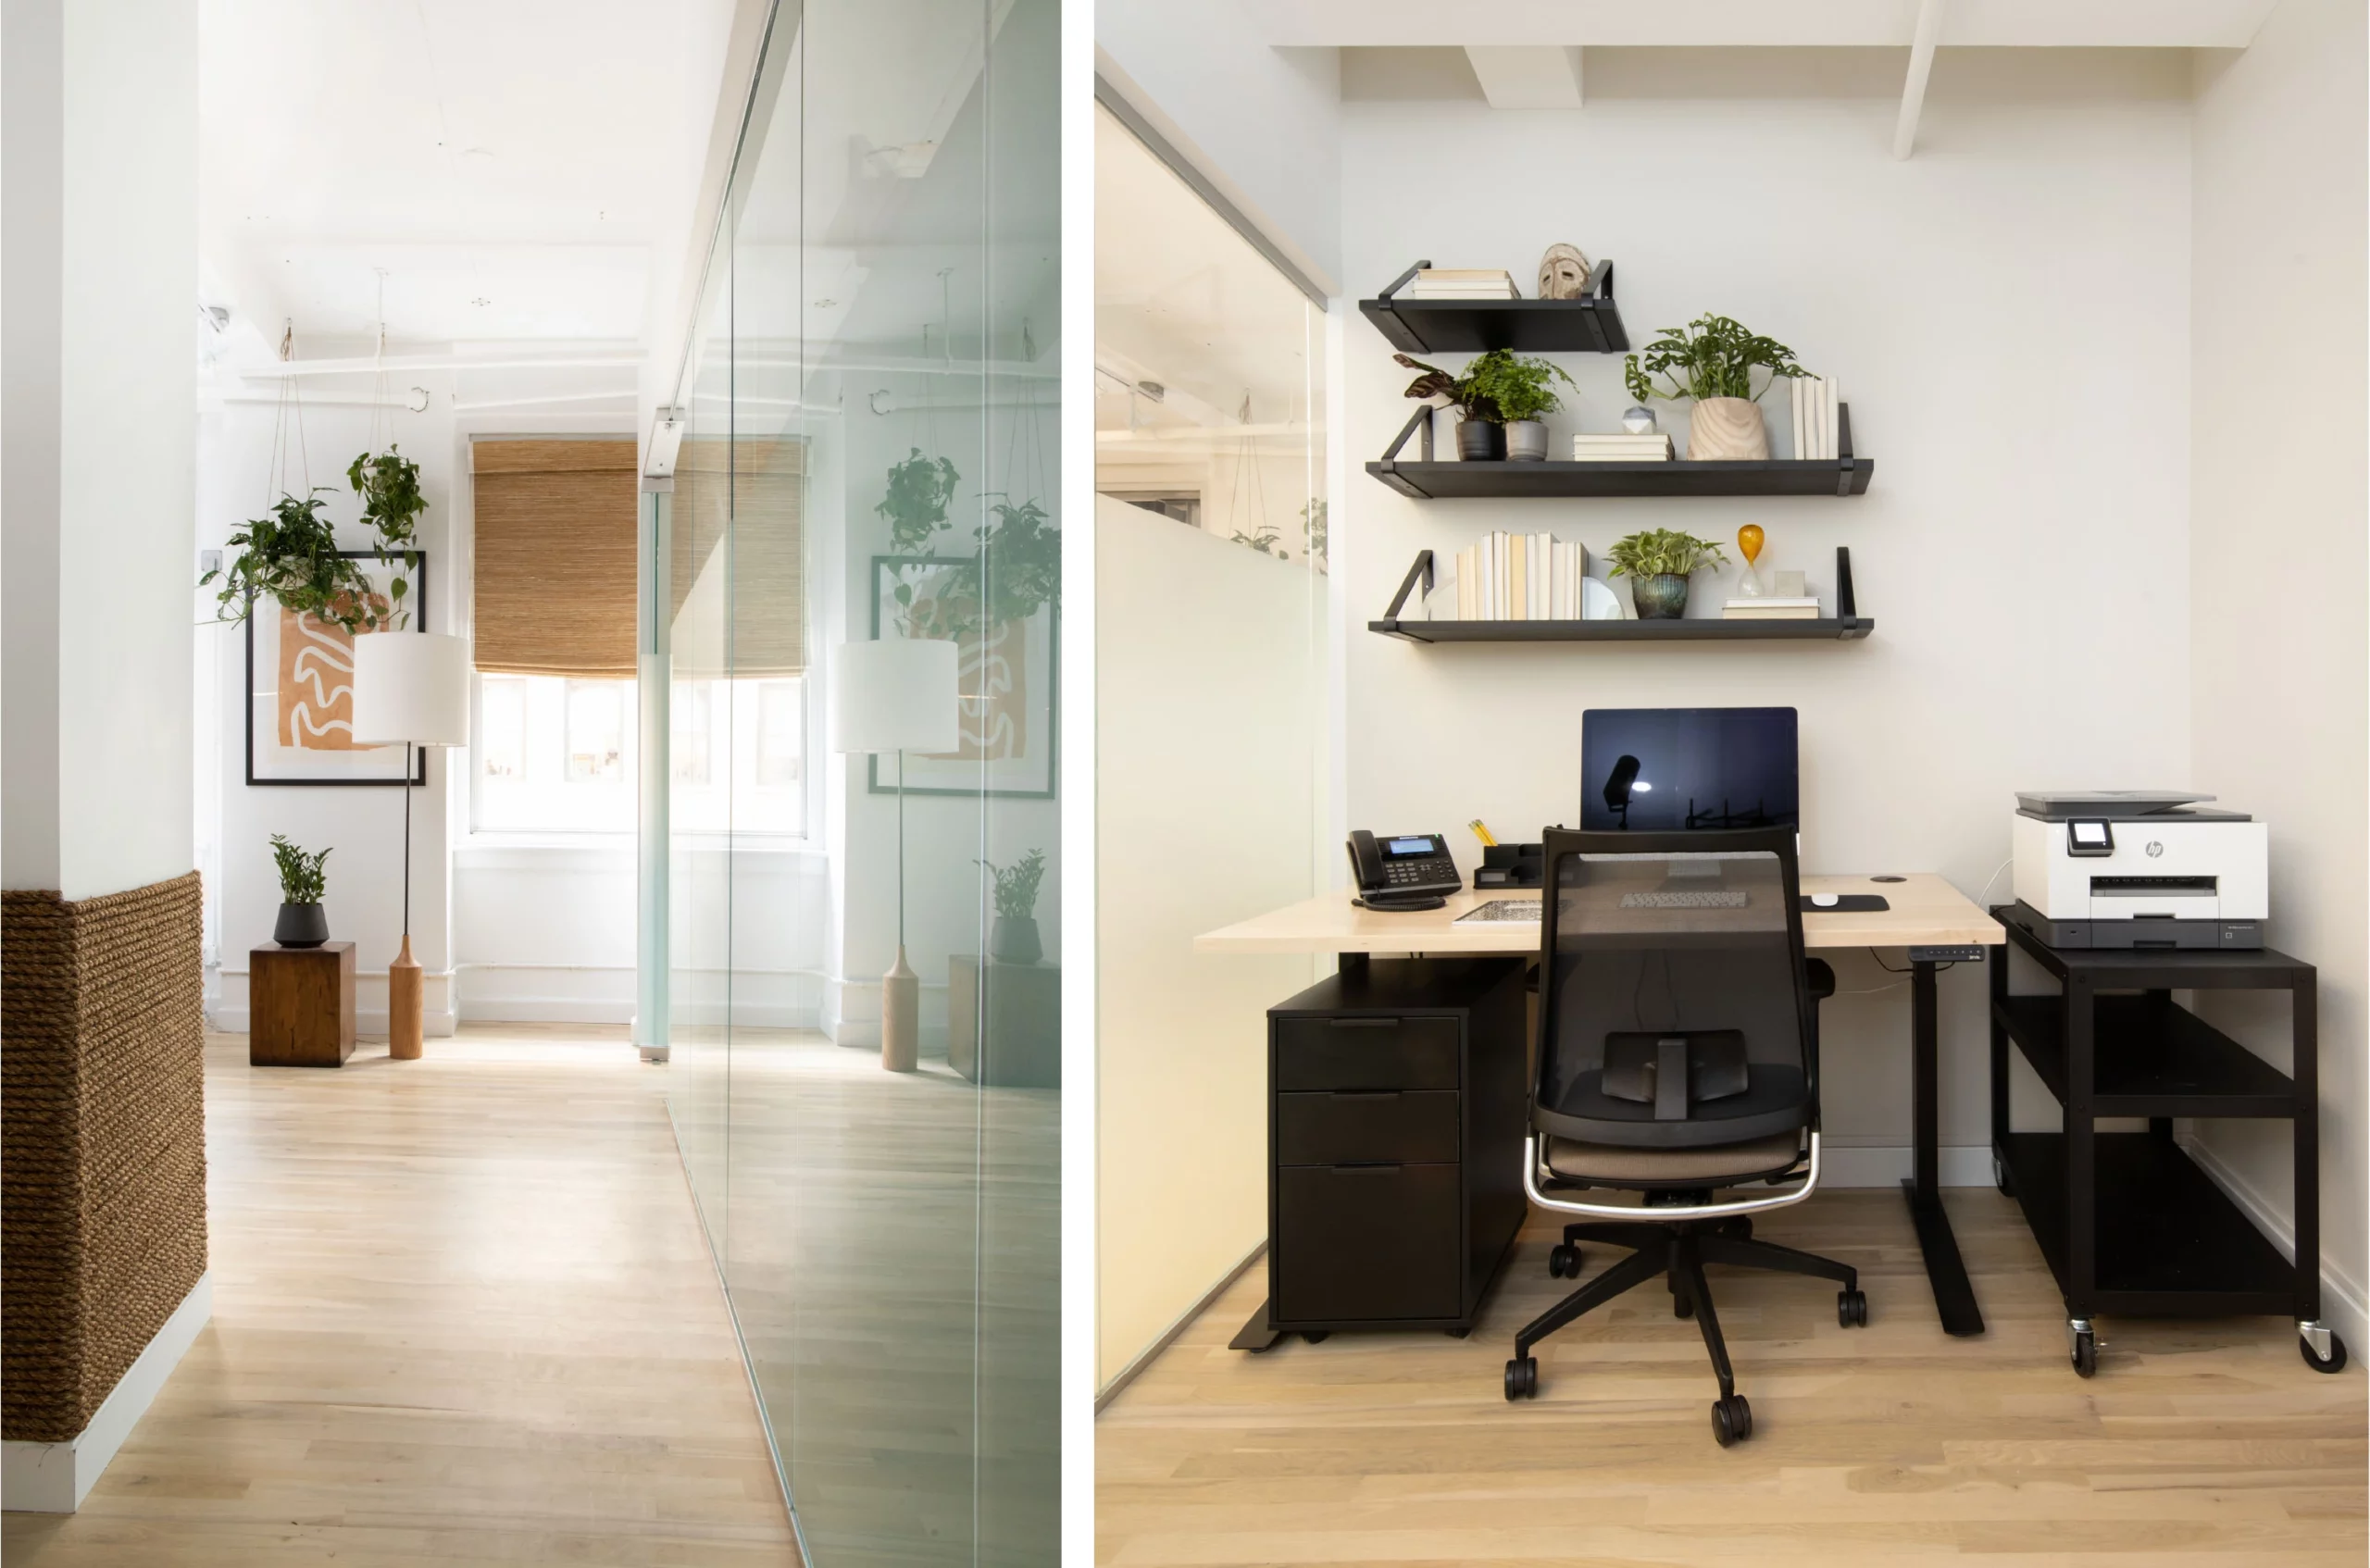 Individual office with light walls and natural wood flooring